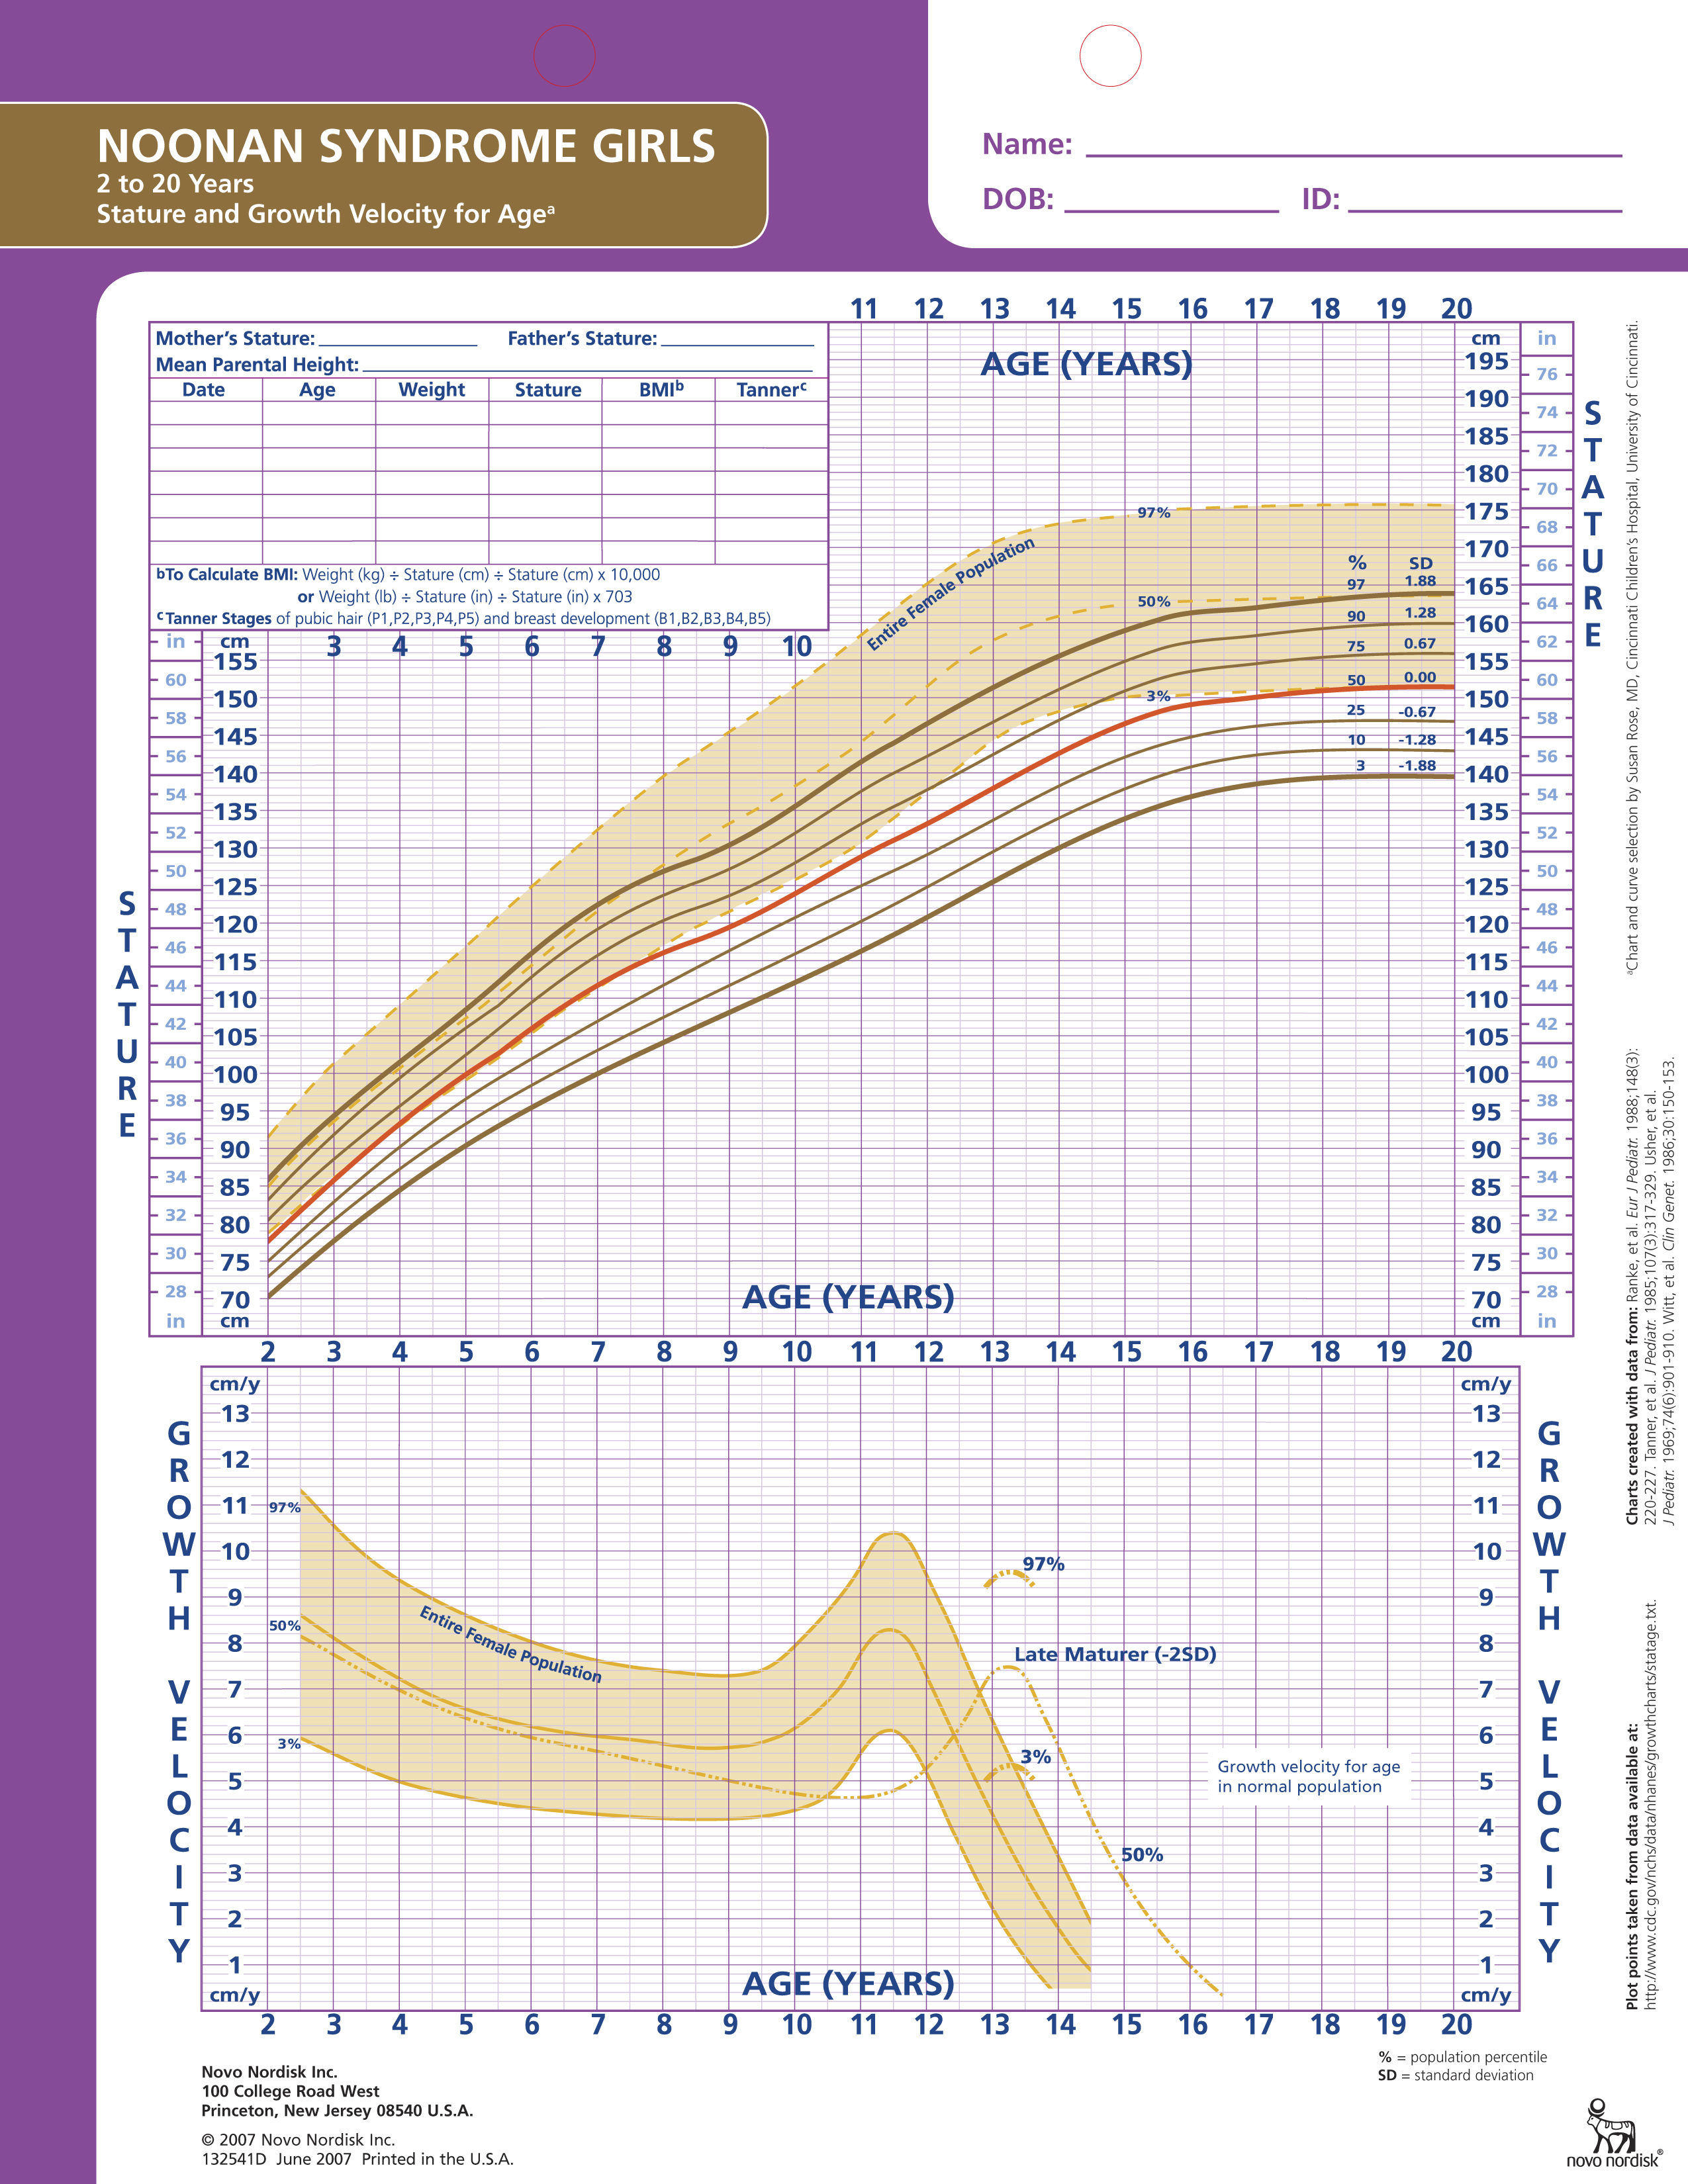 Turner Syndrome Growth Chart Pdf